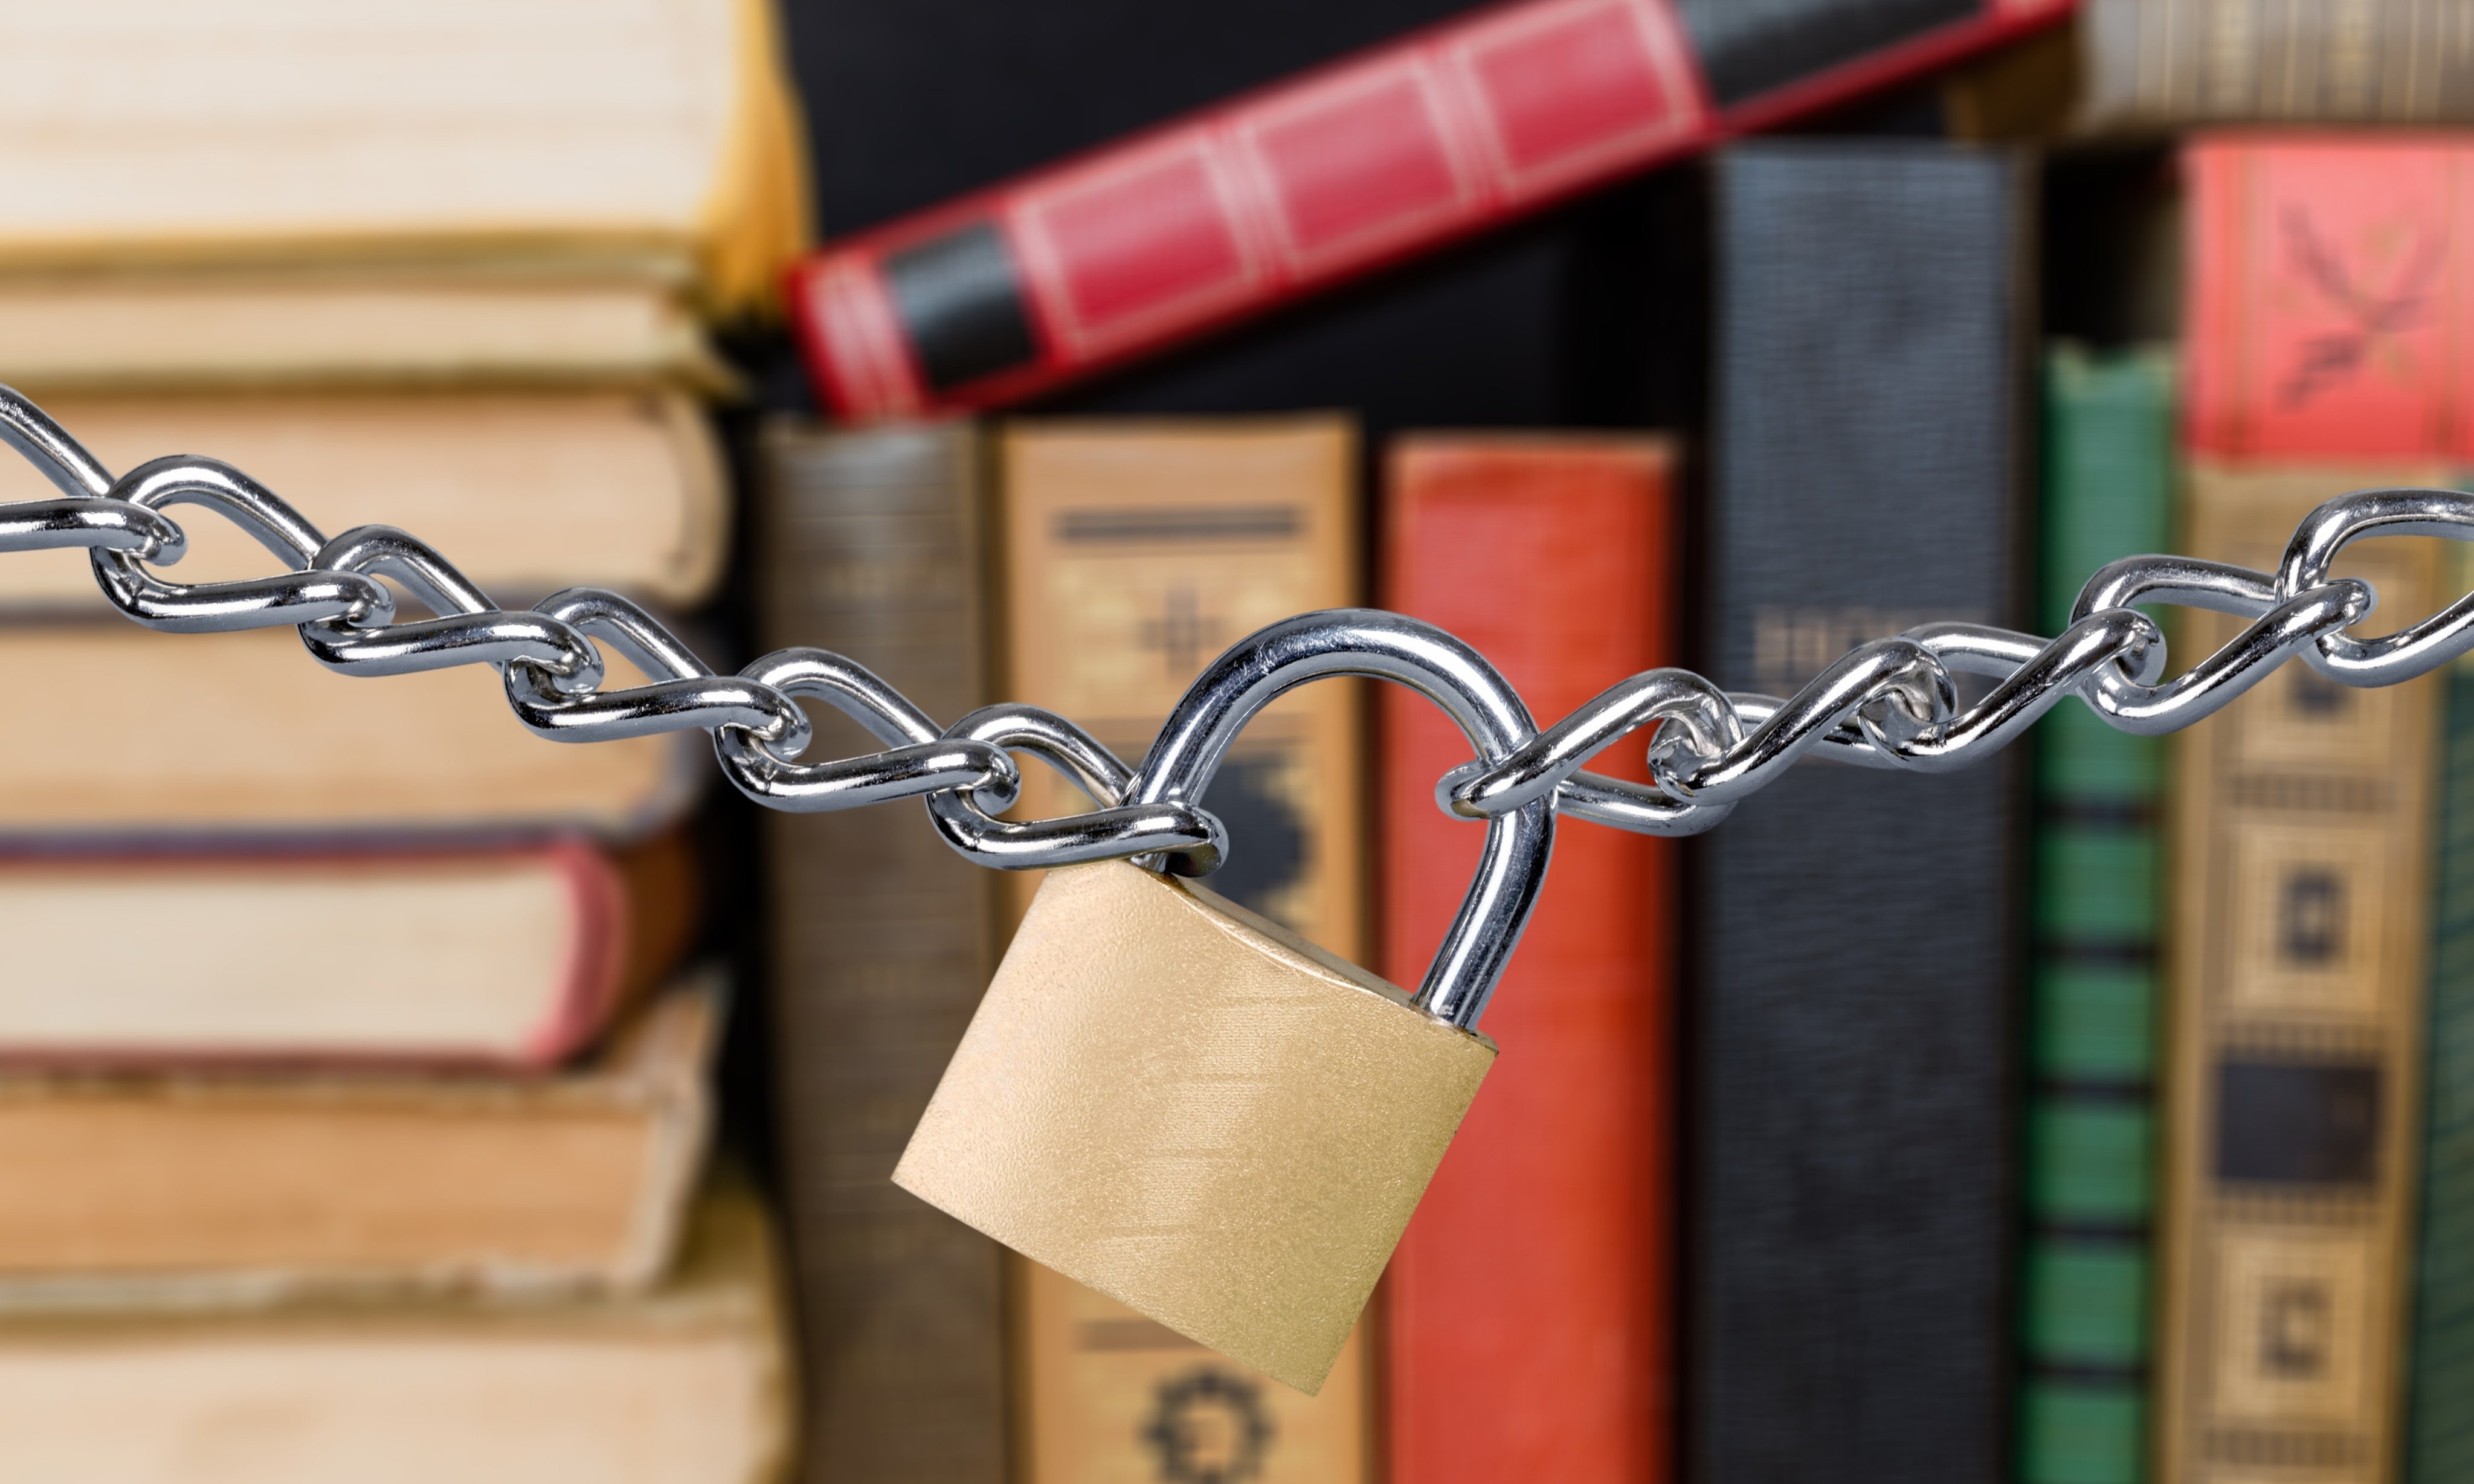 Many book ban controversies stem from disputes over religious content and political beliefs. Photo: Shutterstock